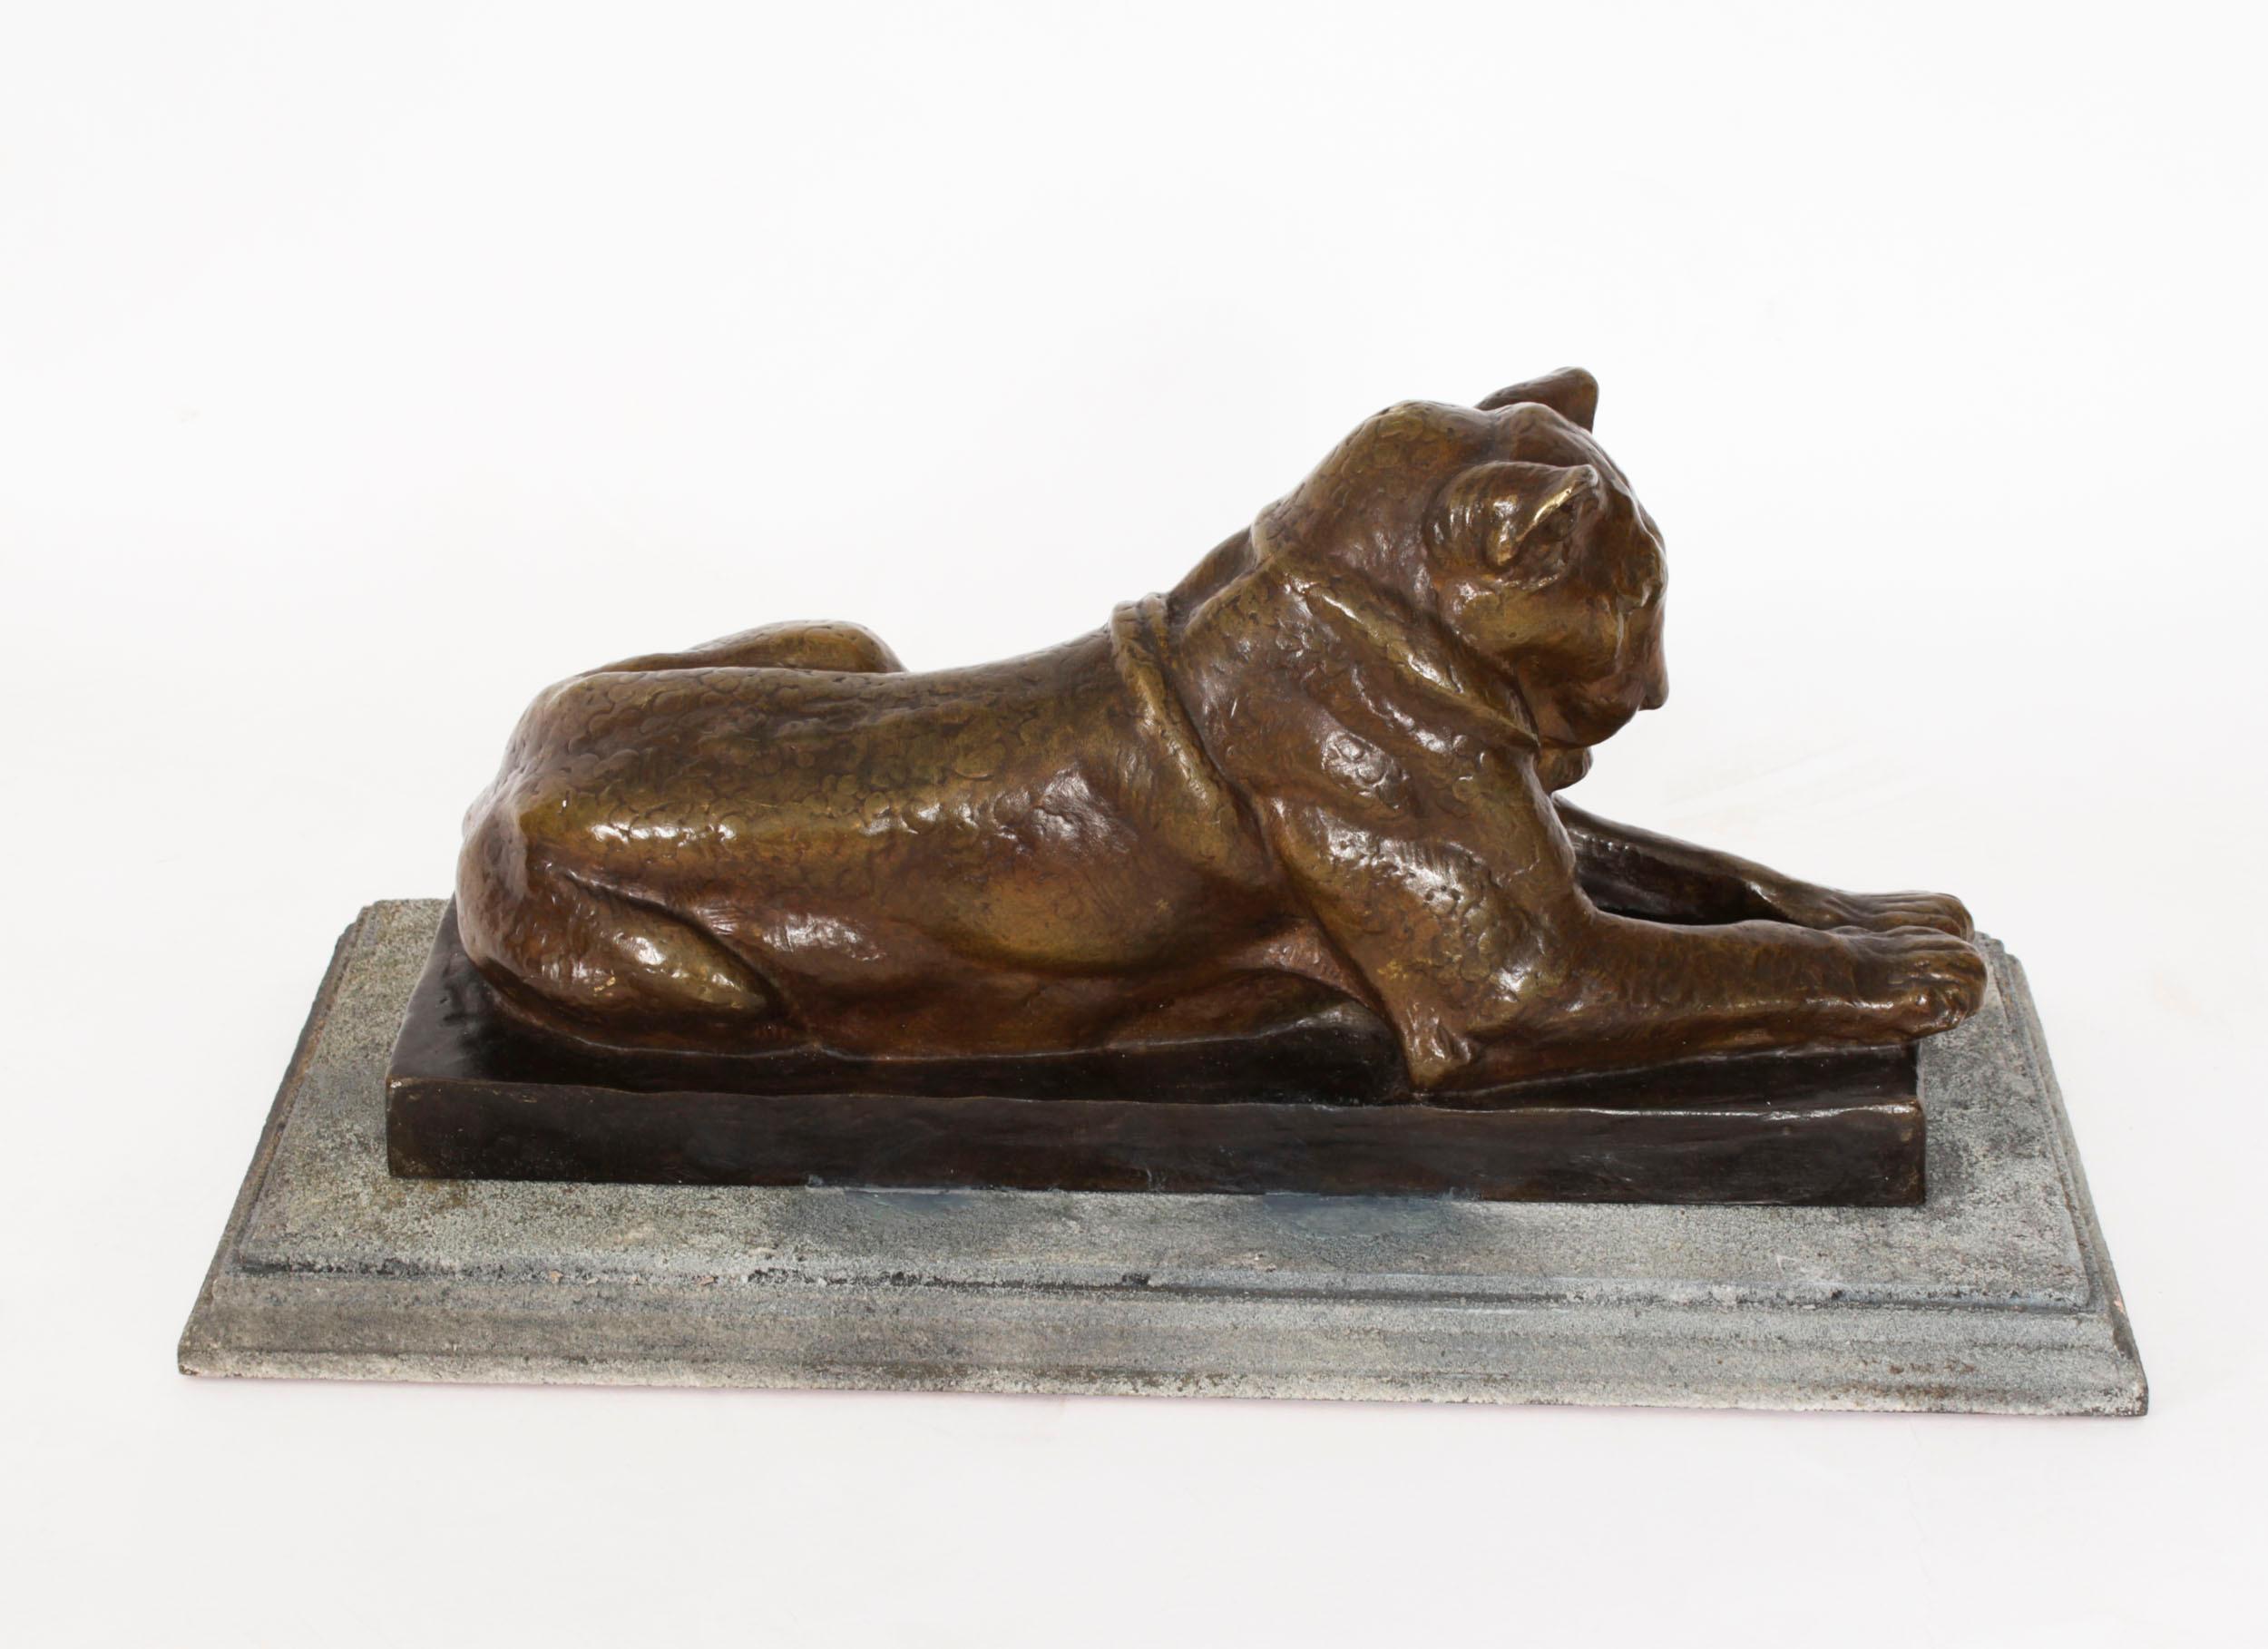 Antique French Bronze Sculpture of Lioness by Louis Riche Early 20th Century For Sale 5